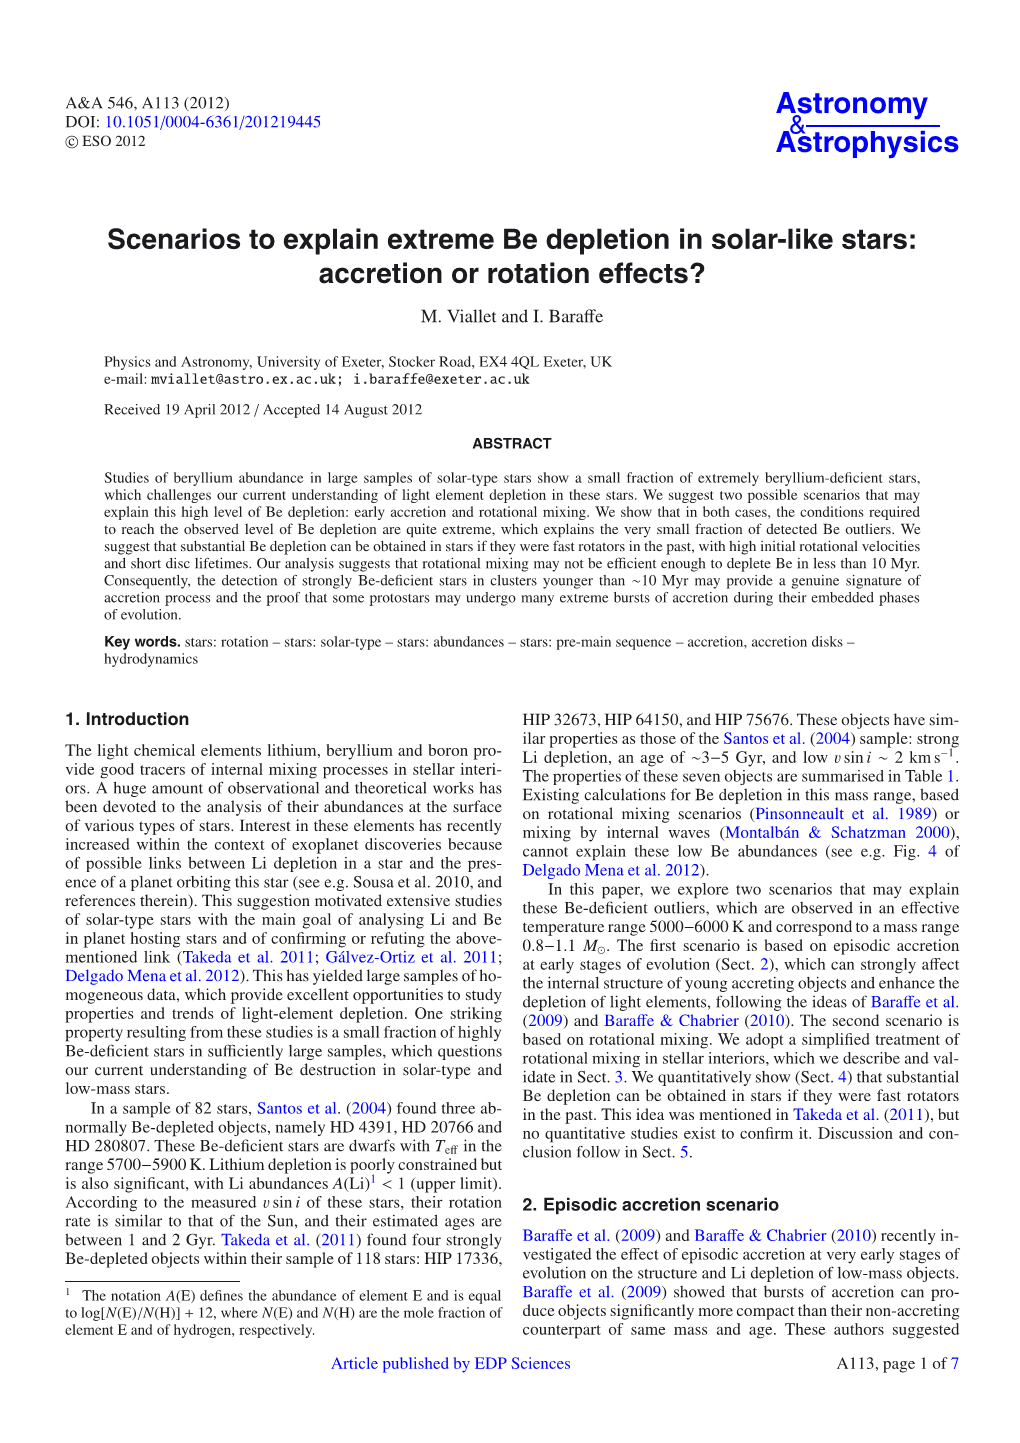 Scenarios to Explain Extreme Be Depletion in Solar-Like Stars: Accretion Or Rotation Effects?